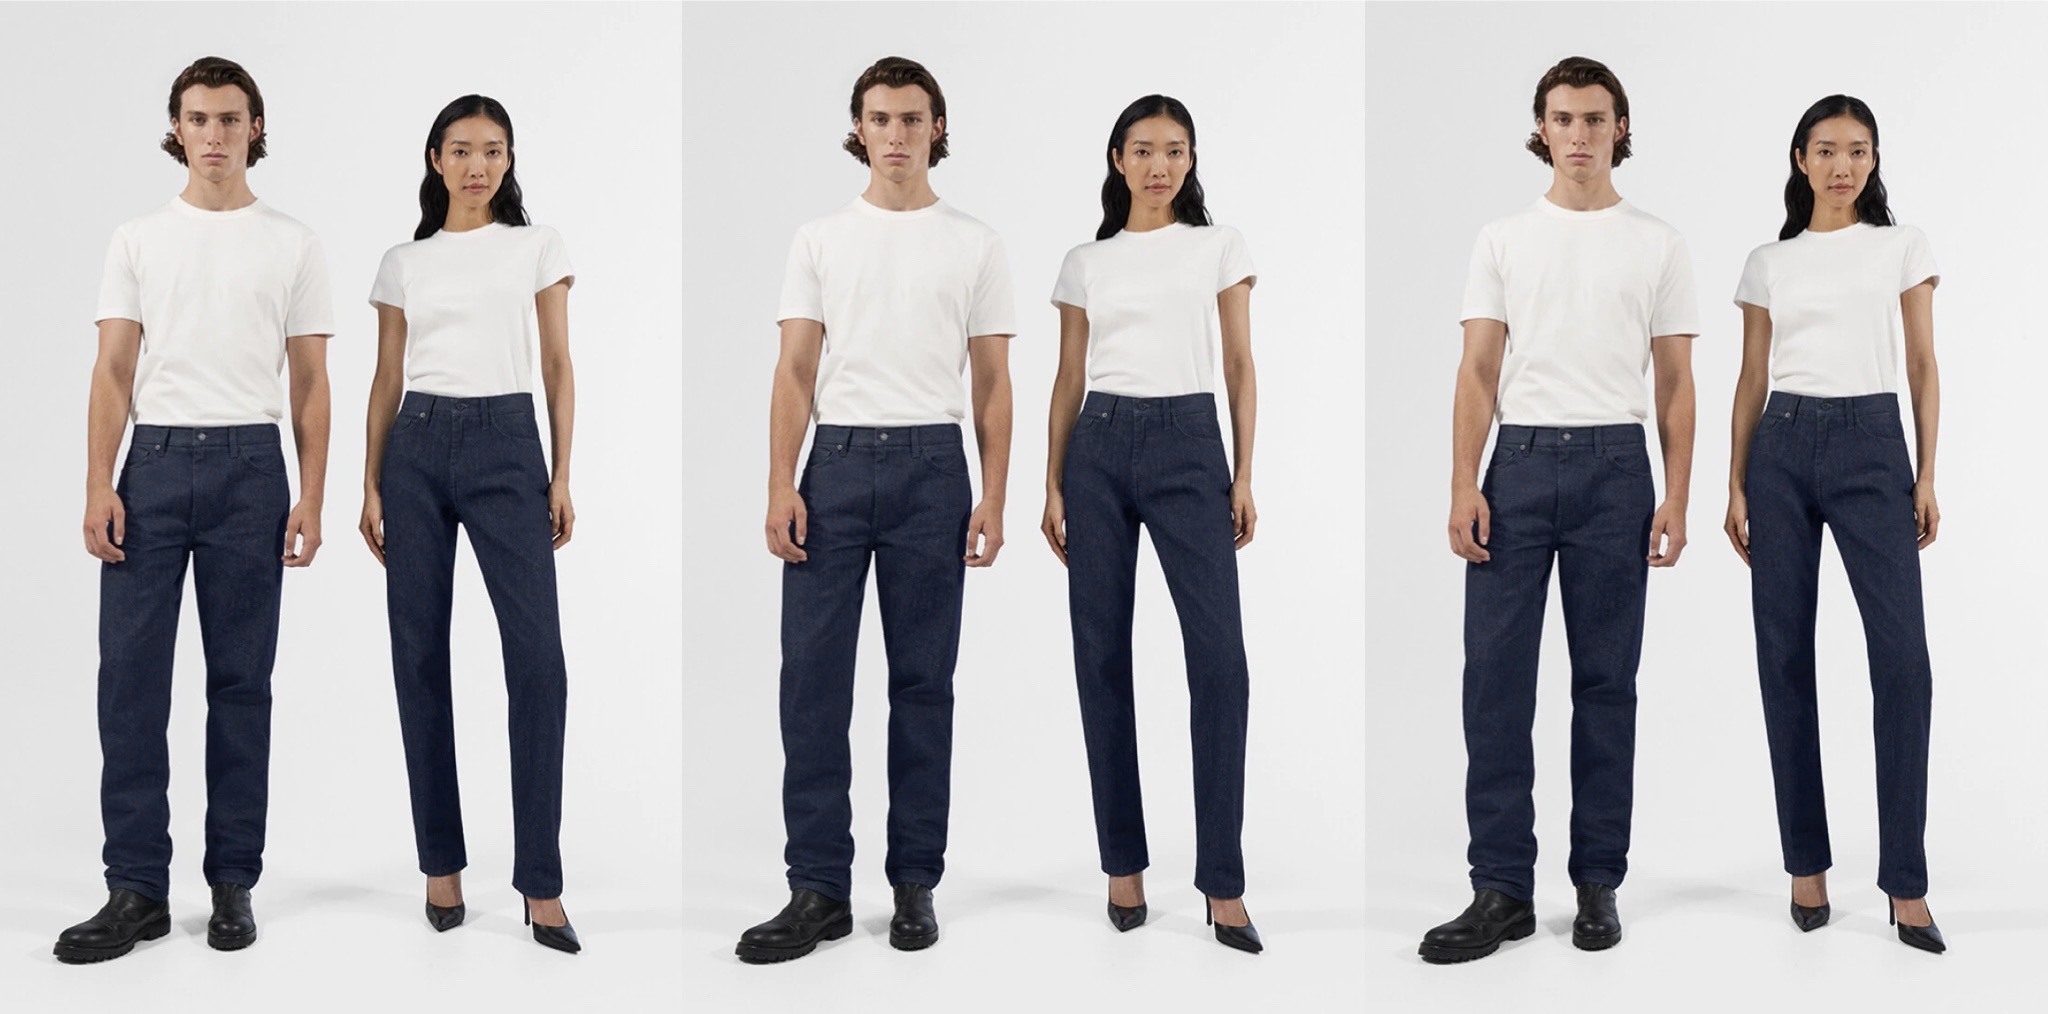 UNIQLO and HELMUT LANG: One jean to rule them all